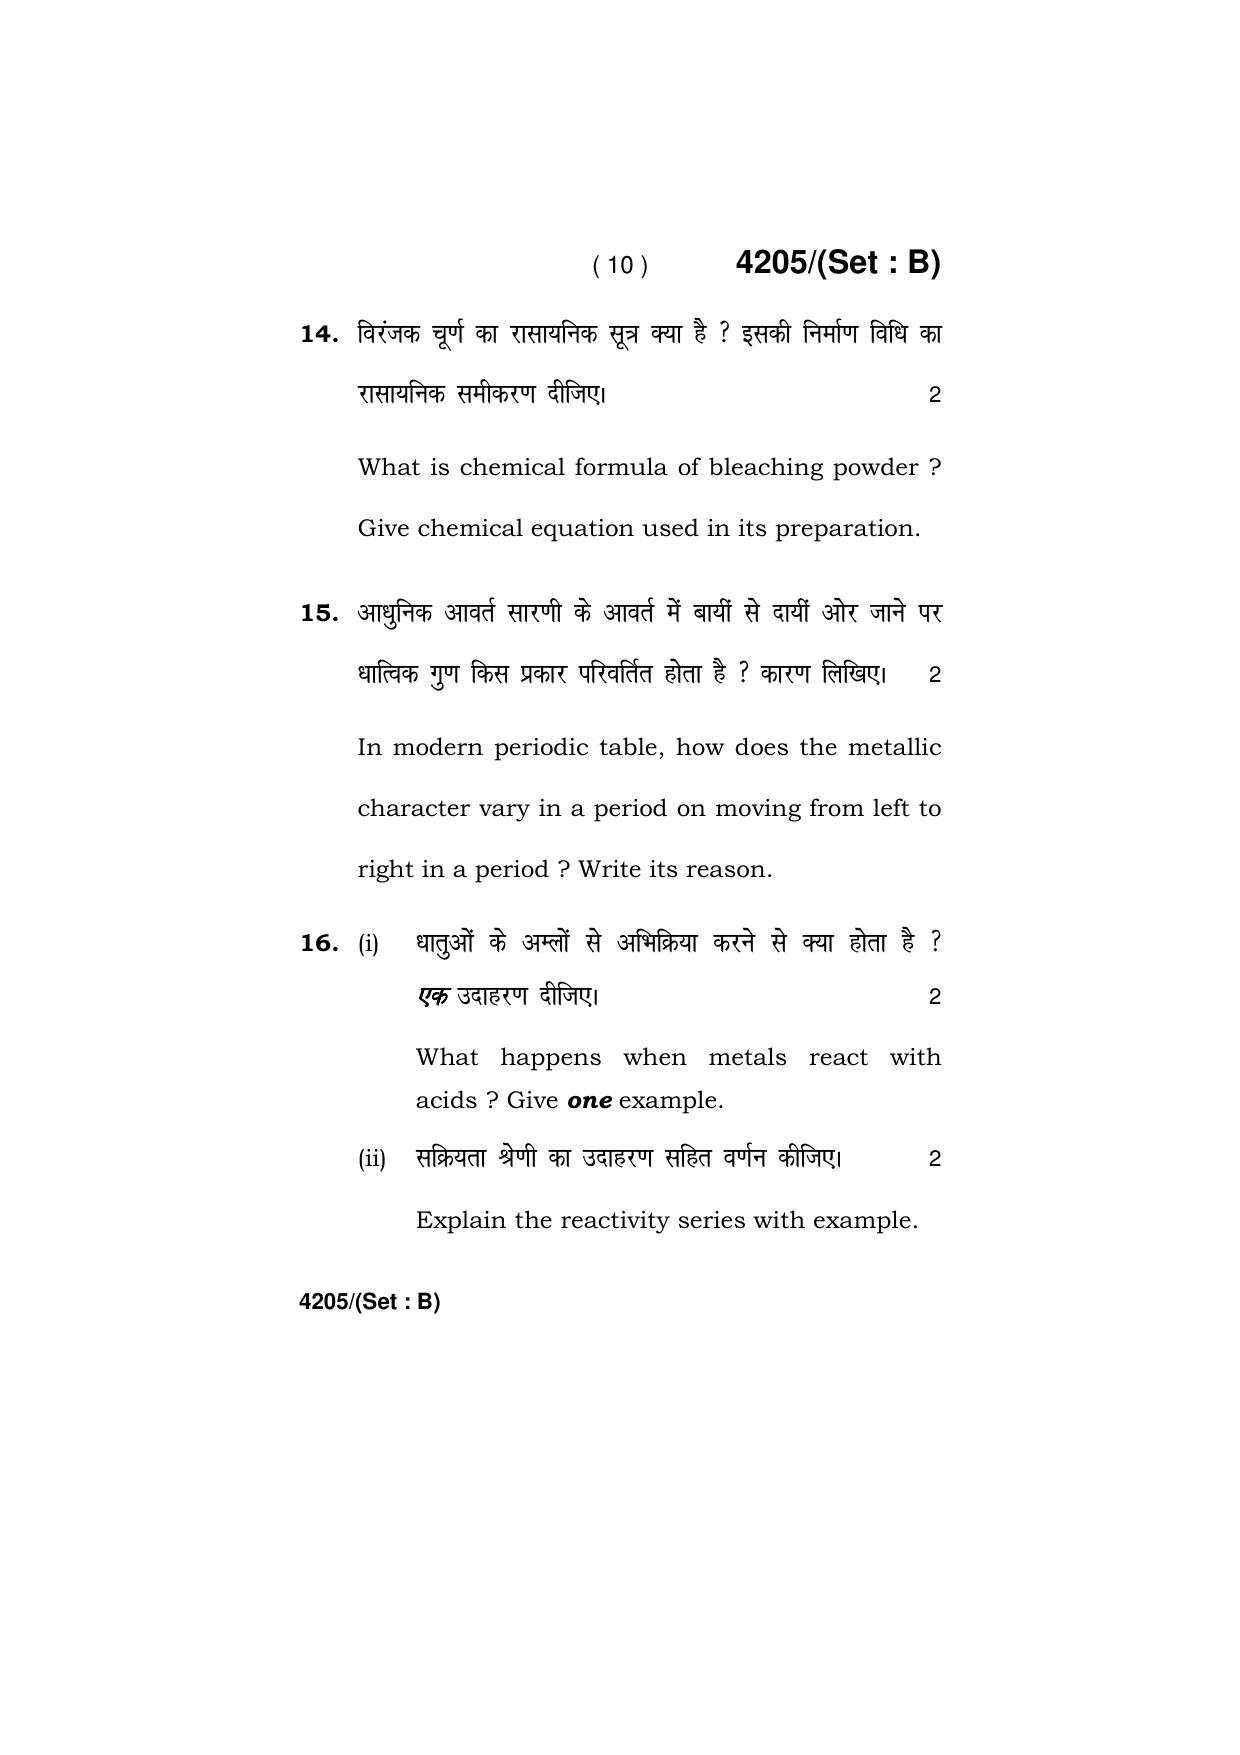 Haryana Board HBSE Class 10 Science (All Set) 2019 Question Paper - Page 26